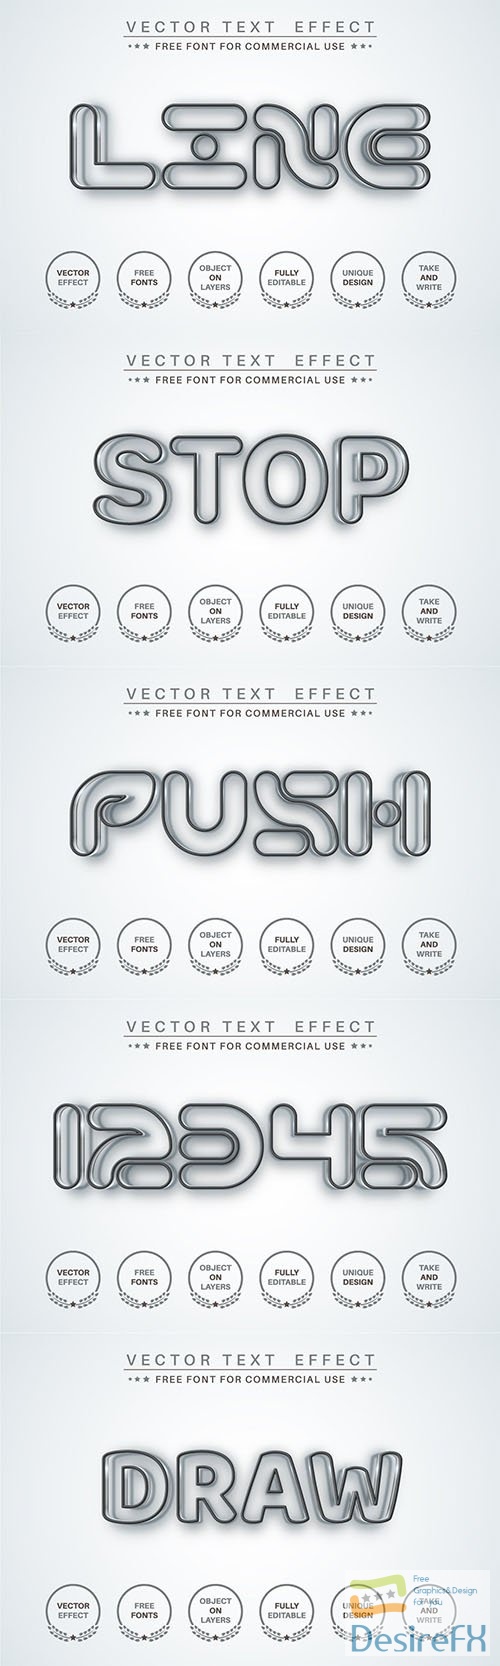 Line - editable text effect, font style